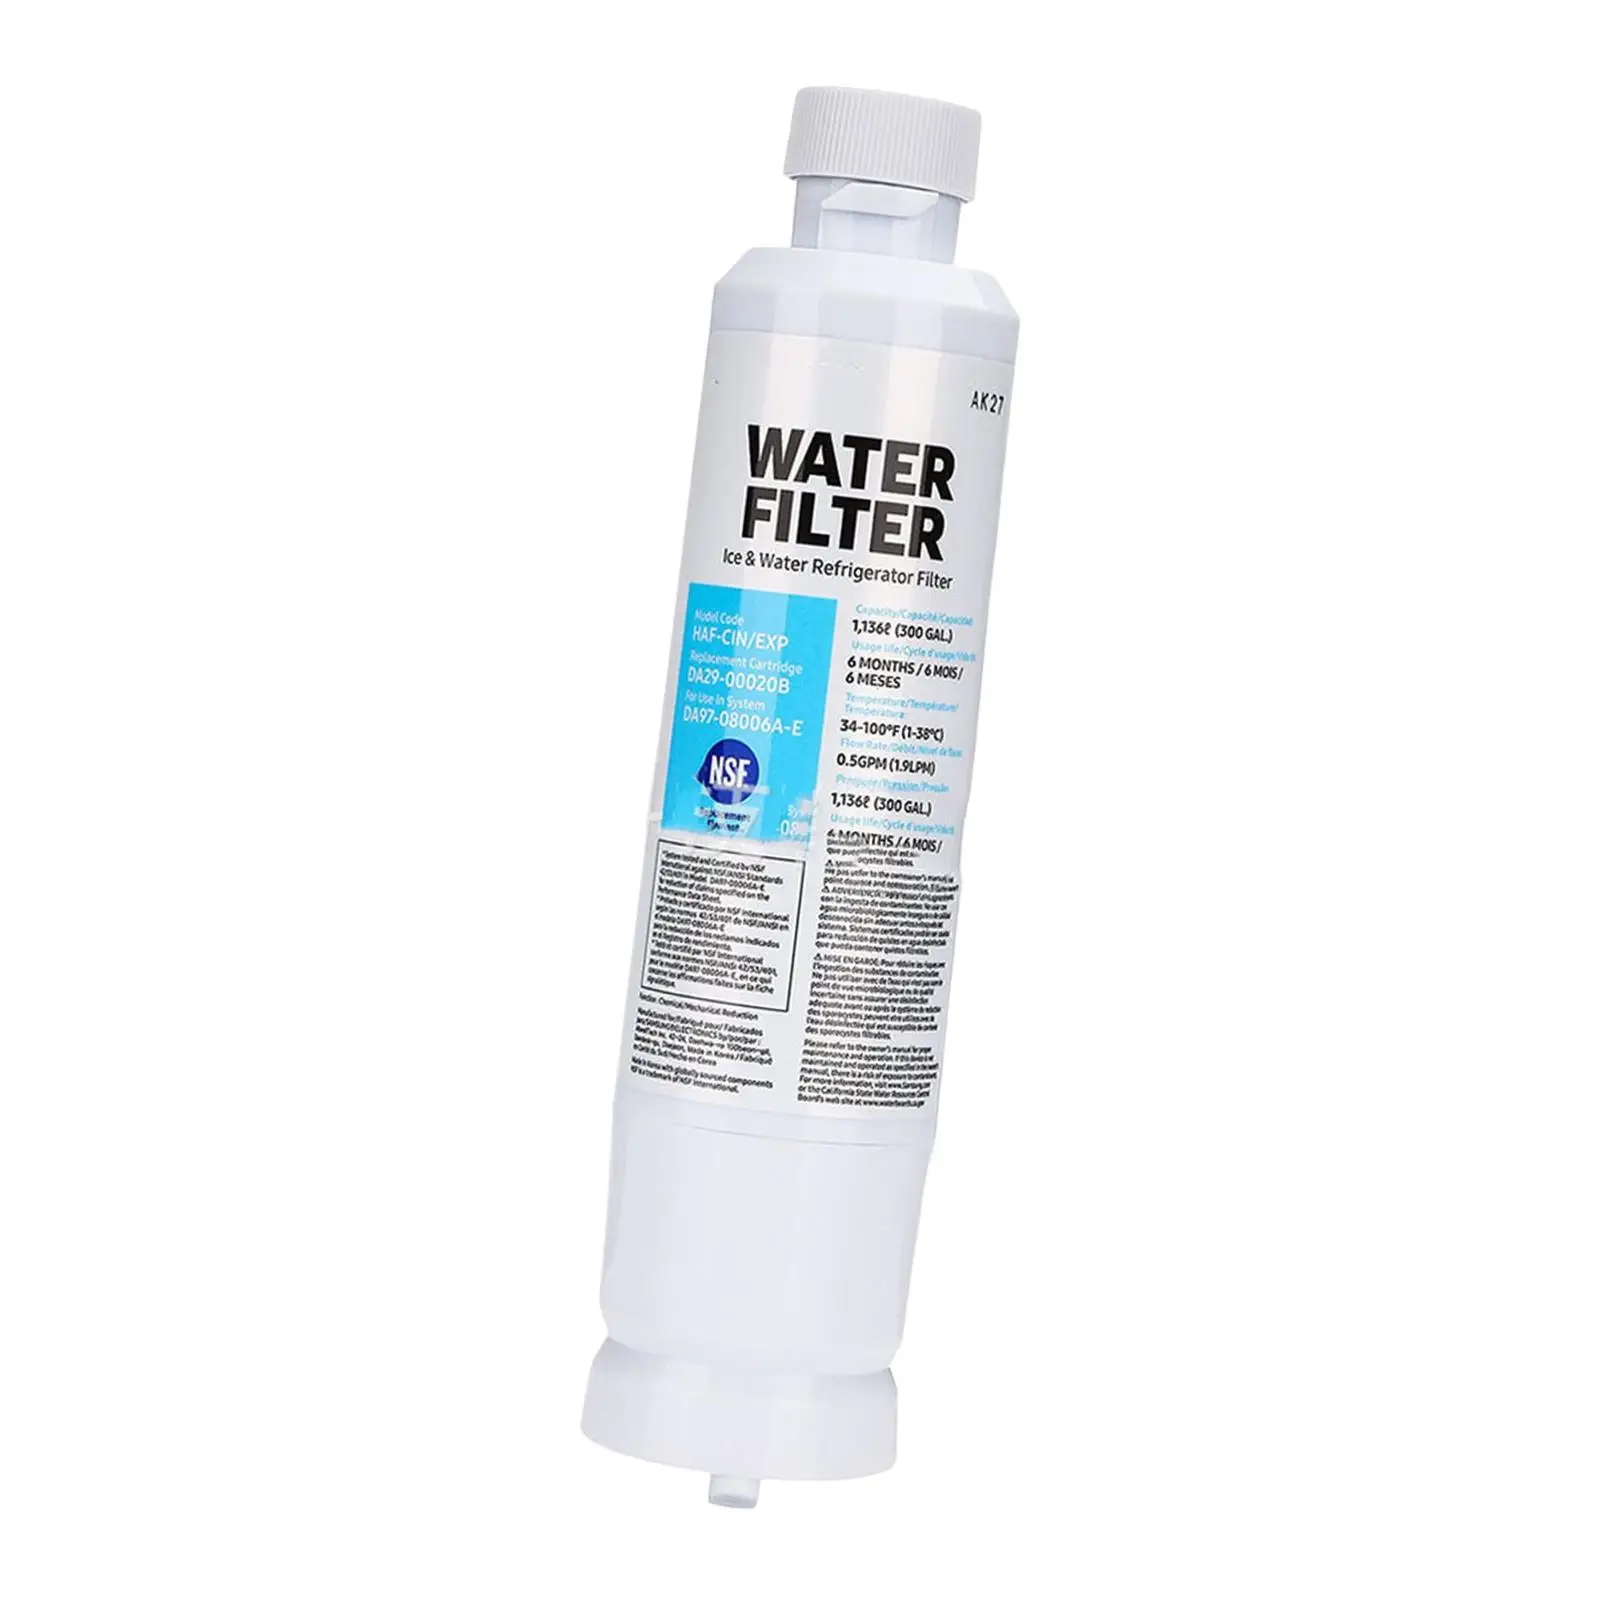 Refrigerator Water Filter Replacement Professional for da29 00020b Freezer Household